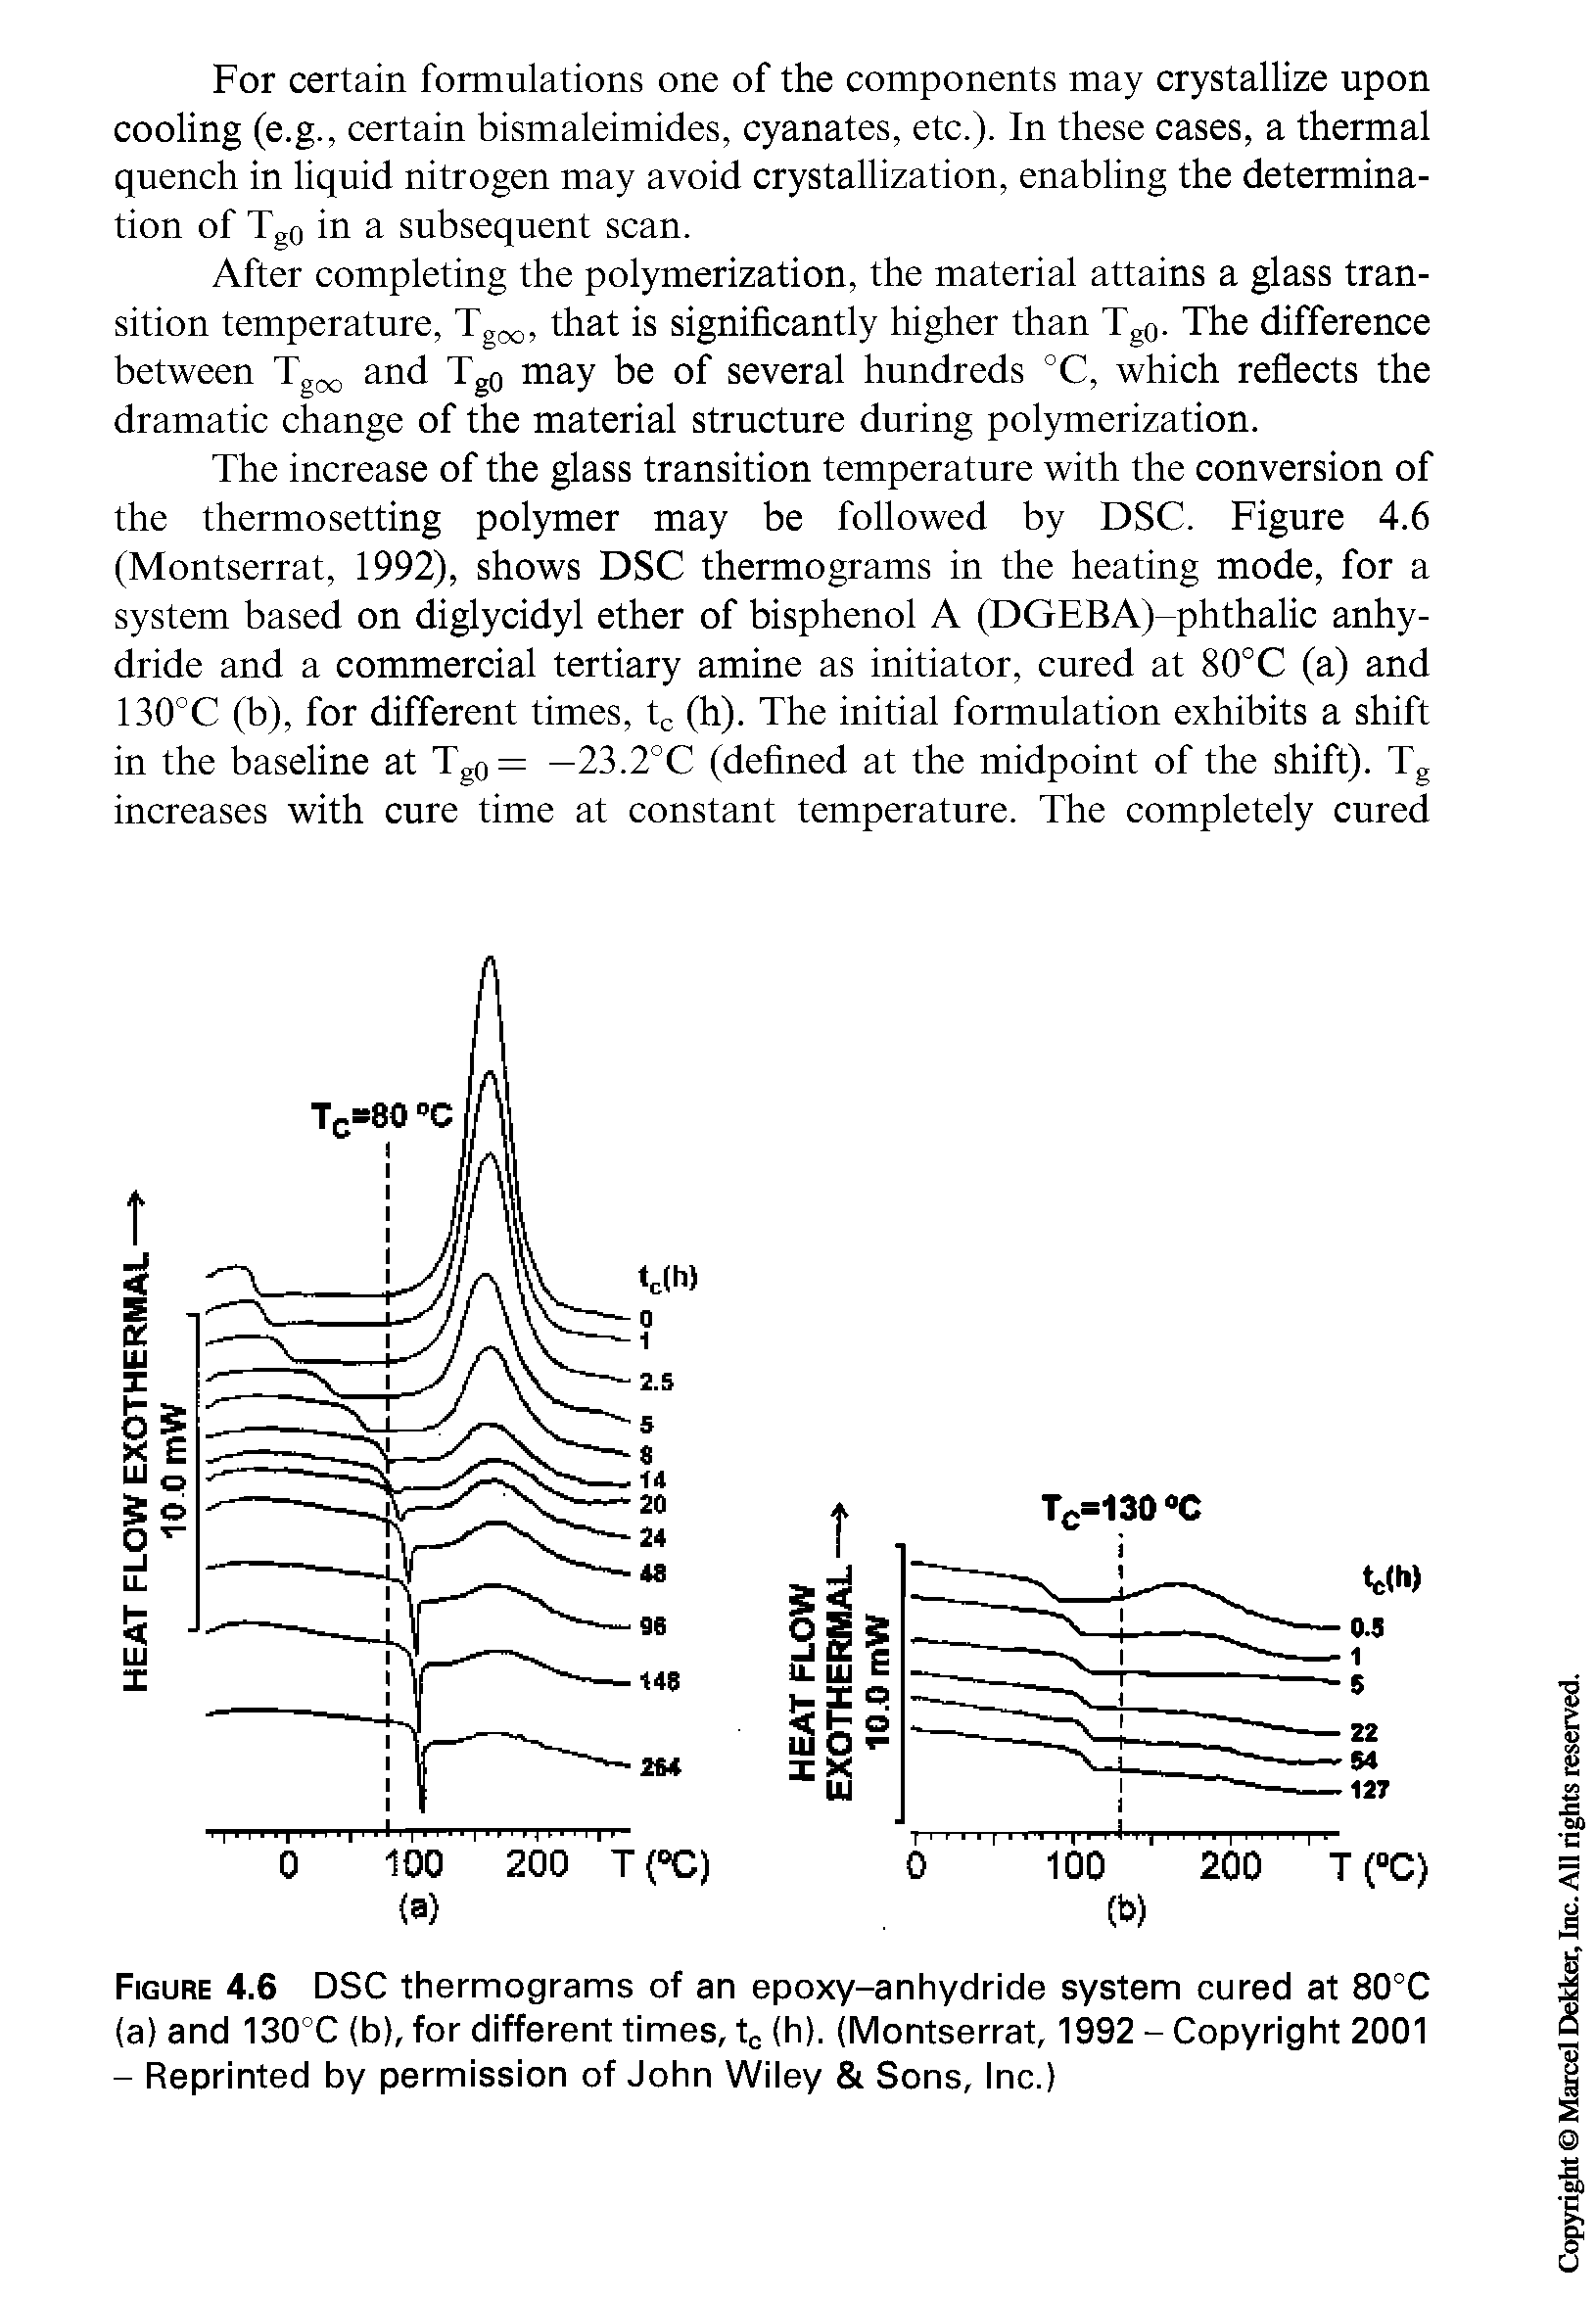 Figure 4.6 DSC thermograms of an epoxy-anhydride system cured at 80°C (a) and 130°C (b), for different times, tc (h). (Montserrat, 1992 - Copyright 2001 - Reprinted by permission of John Wiley Sons, Inc.)...